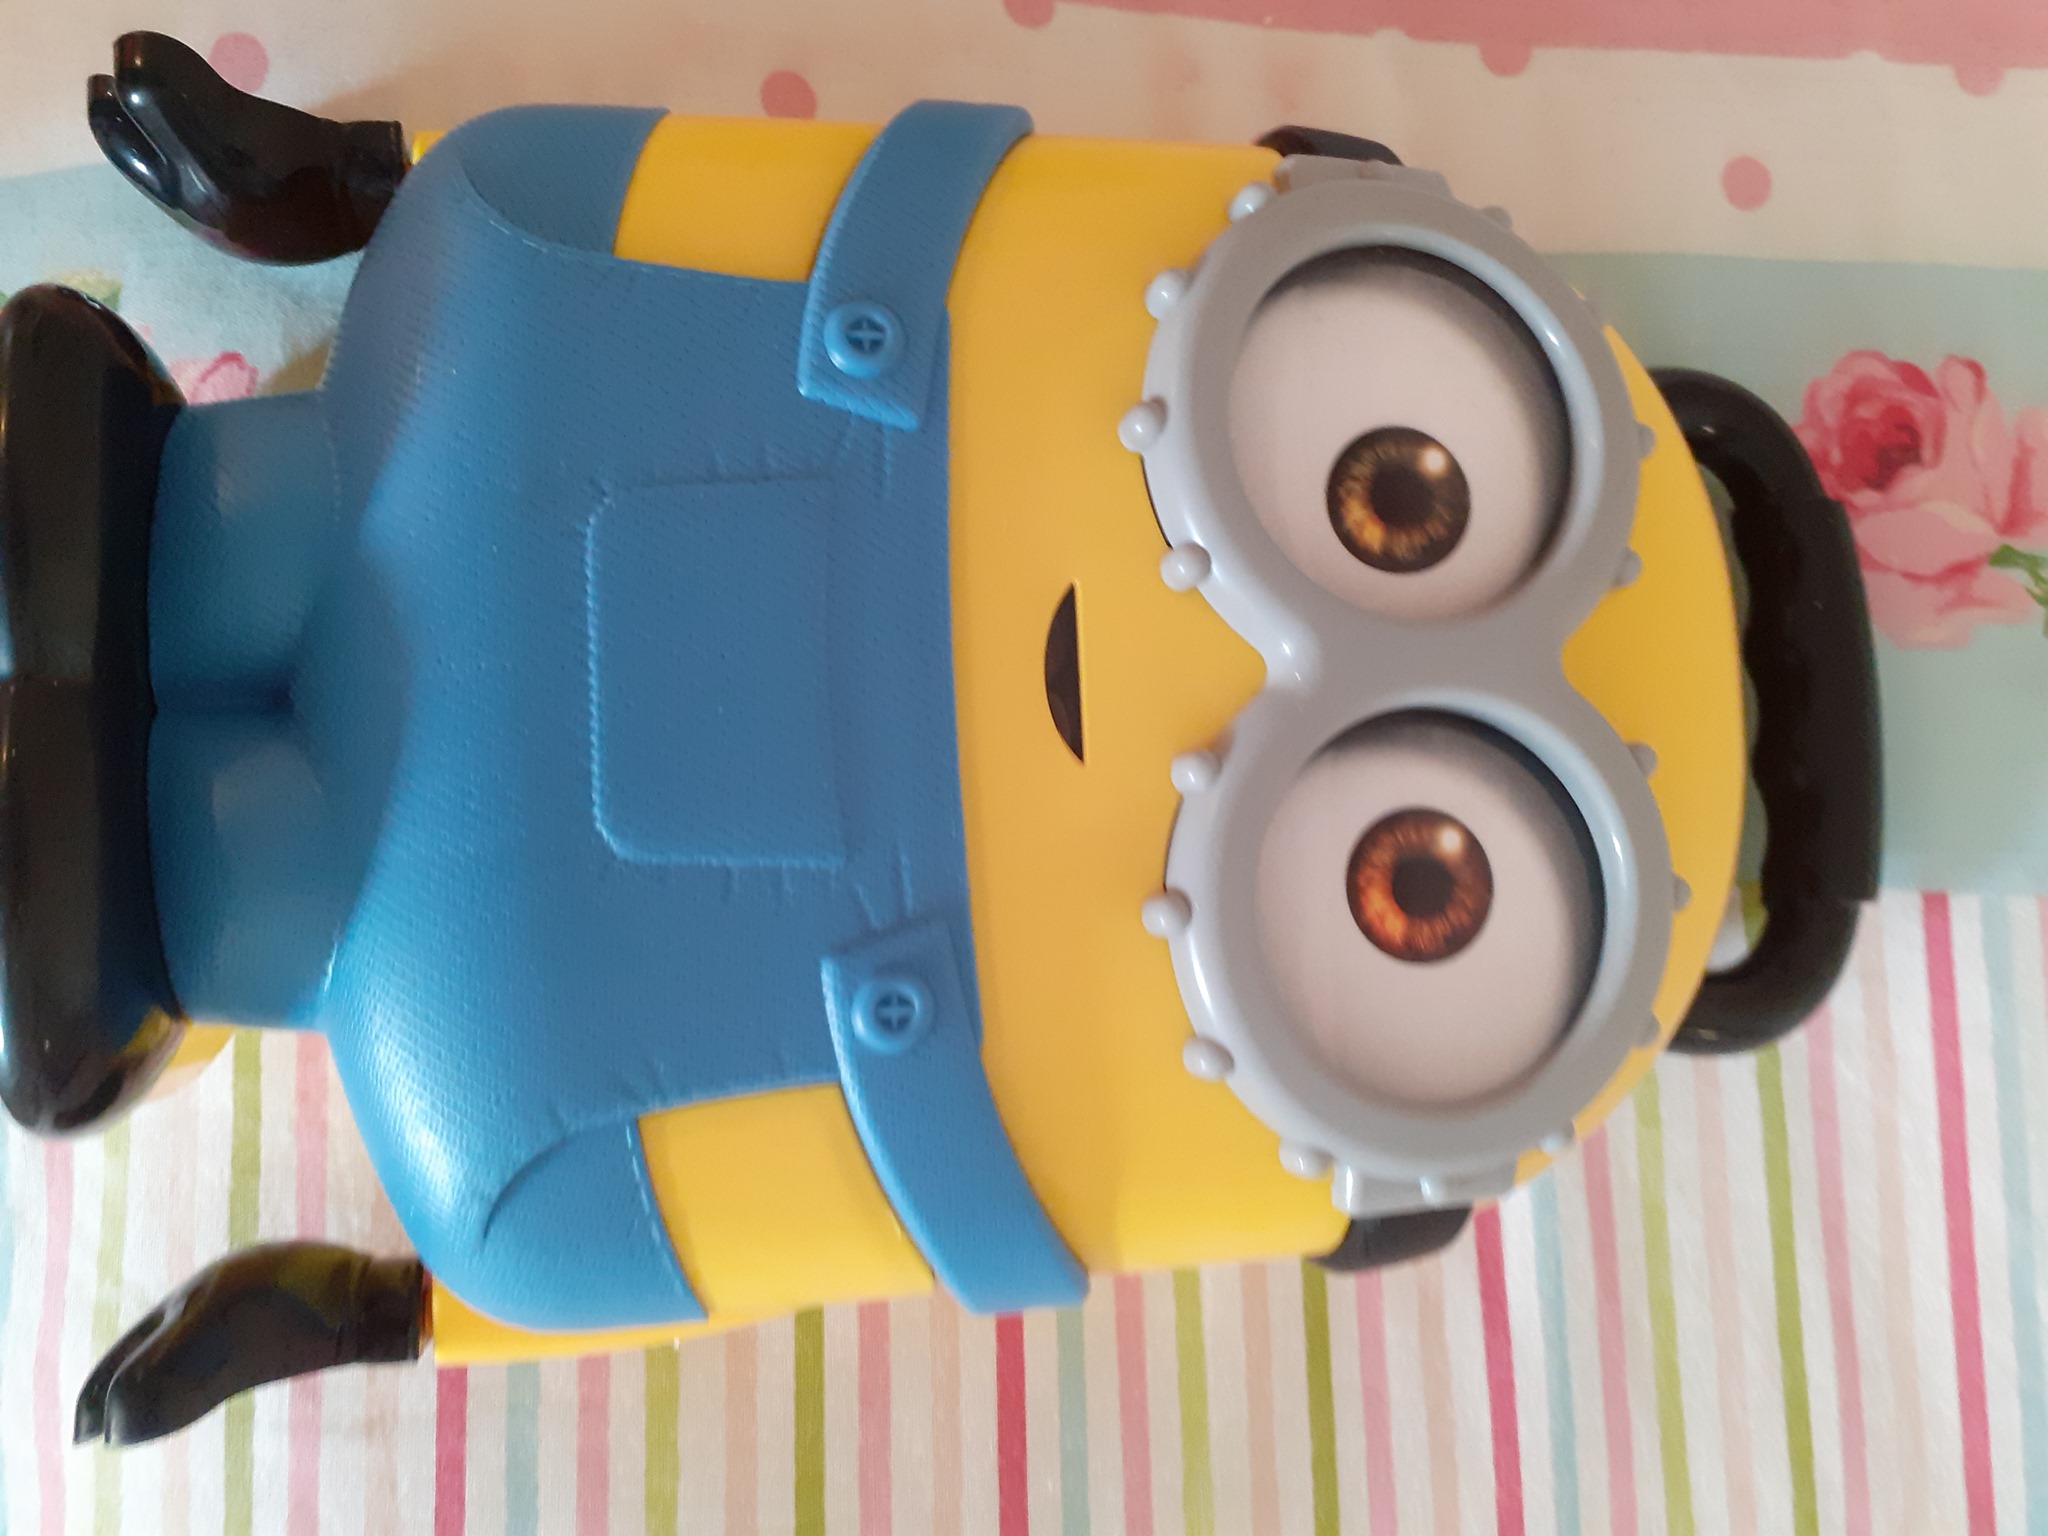  Minions carry case comes with catcher banana and teddy Minions carry case comes with catcher banana and teddy